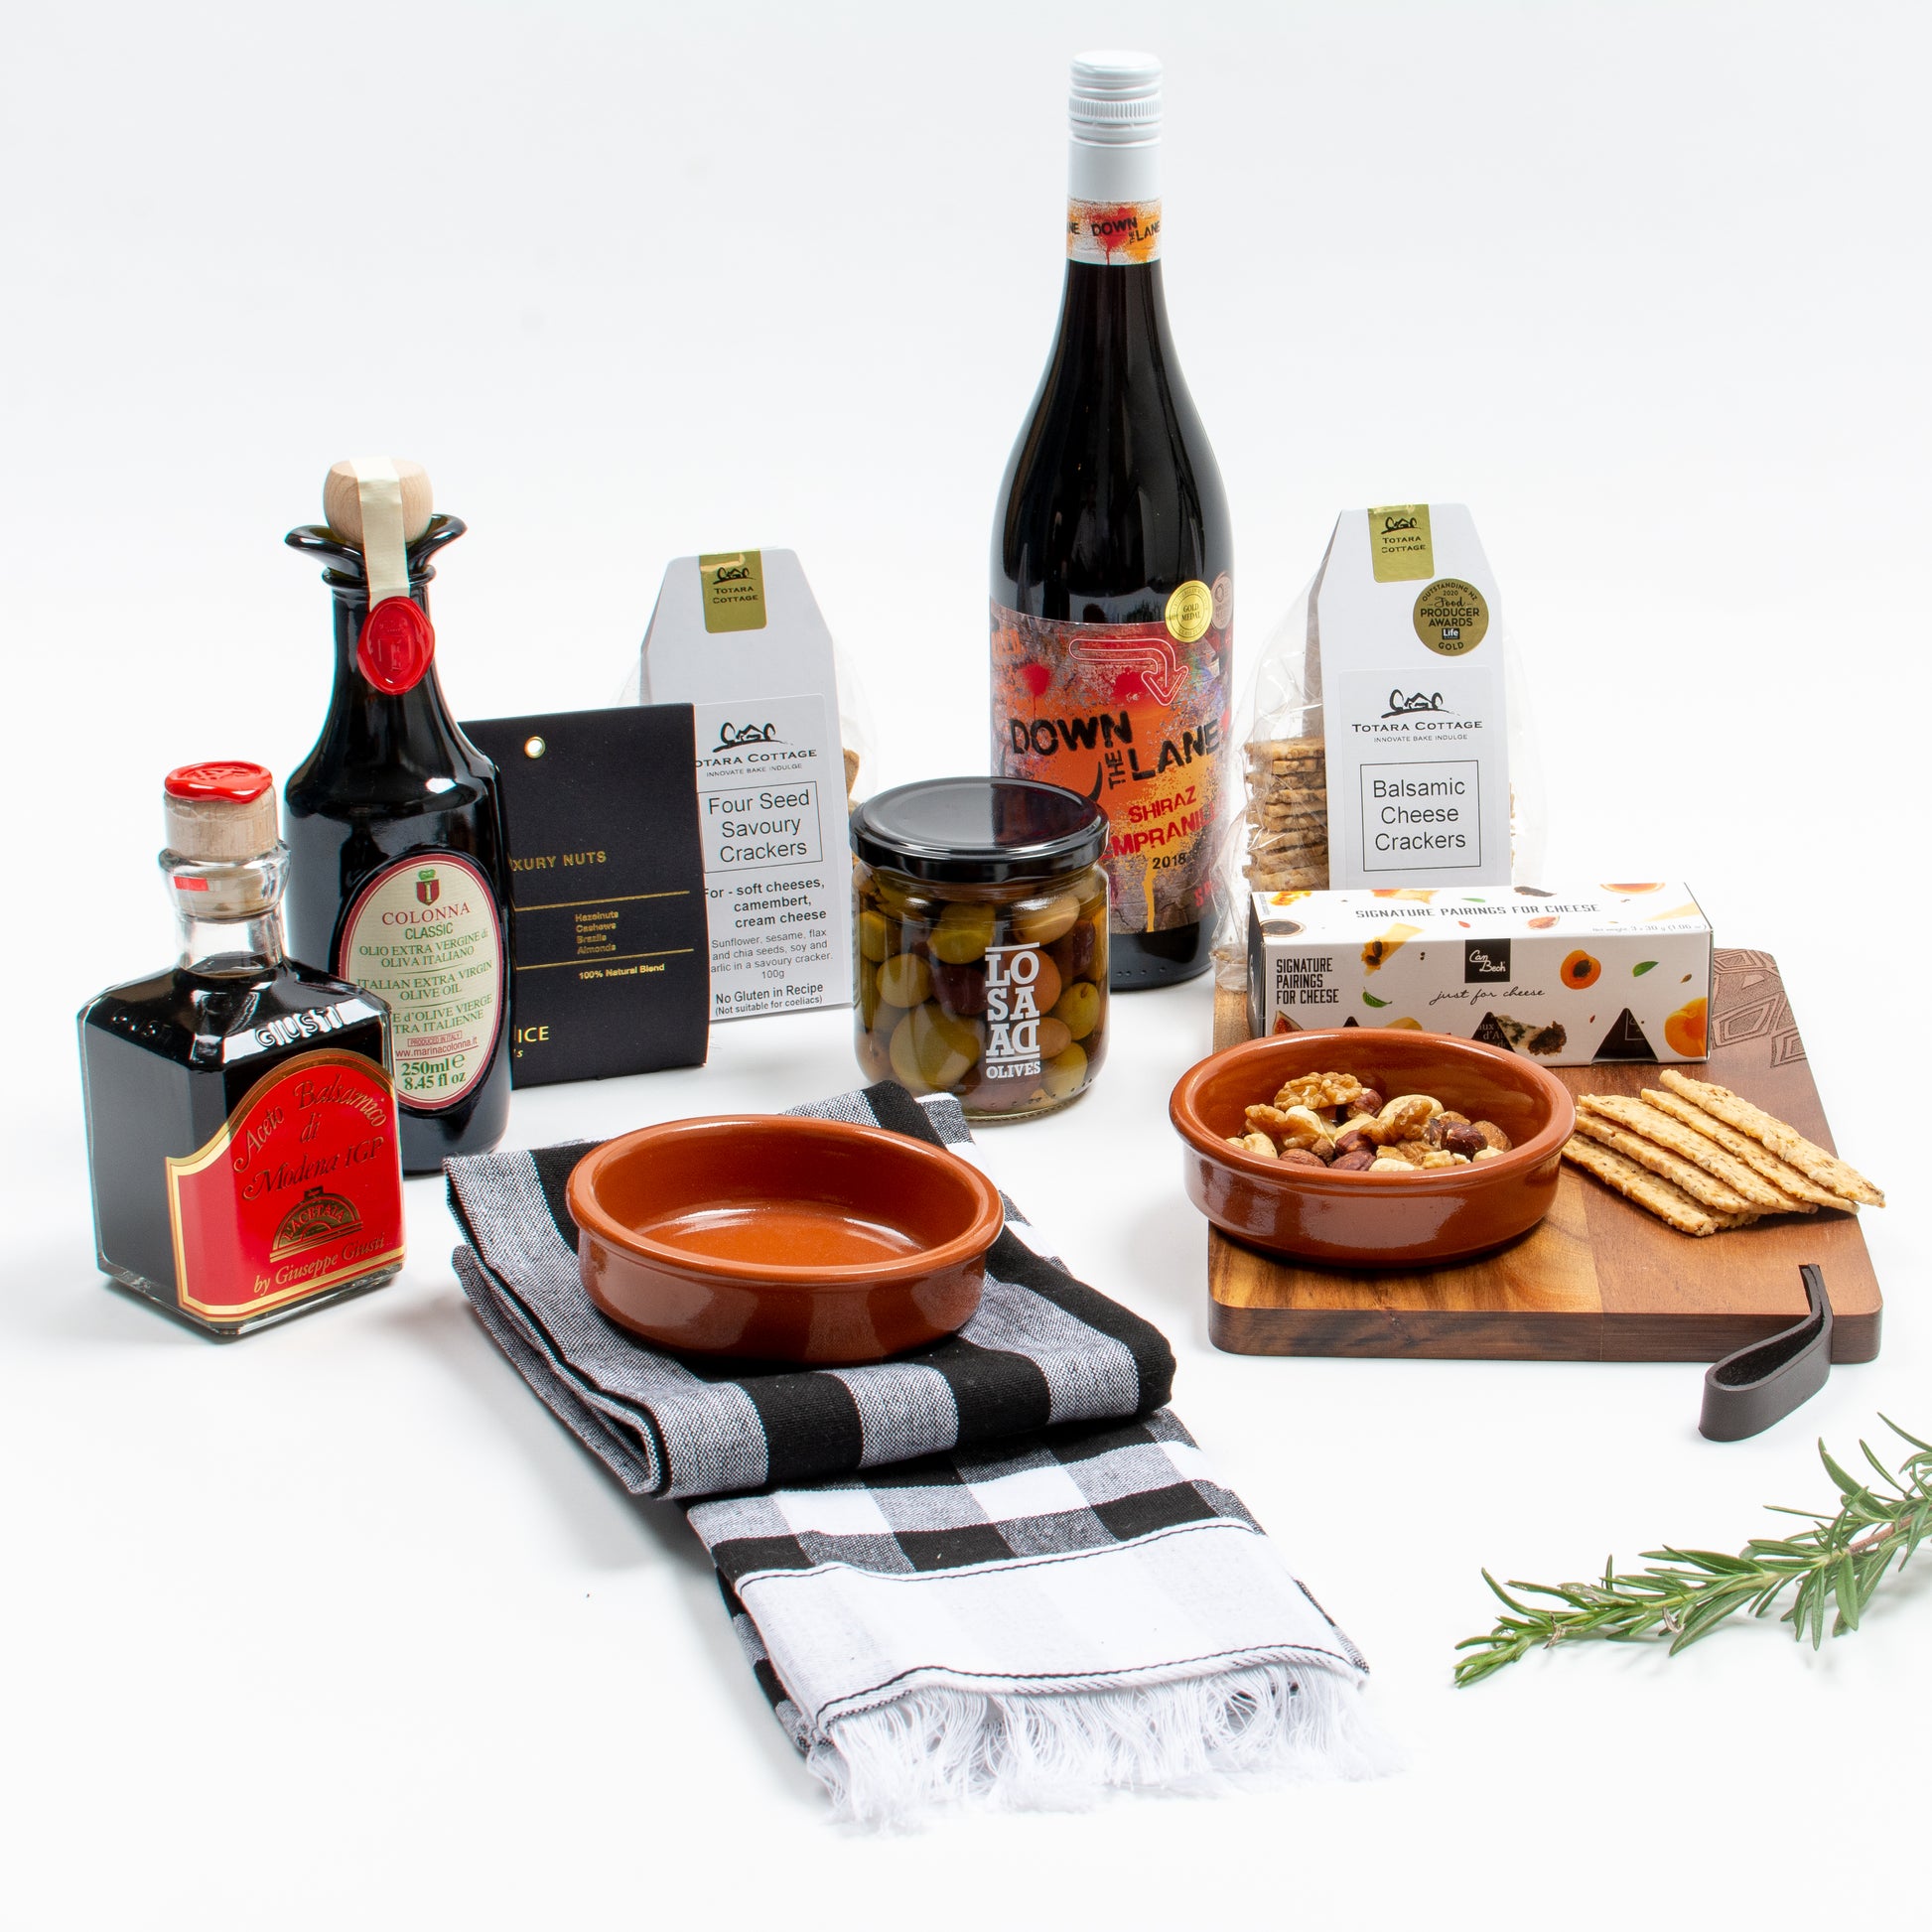 Products displayed out of gift box are wooden board, two tea towels, two tapas dishes, two crackers, nuts, cheese jellies, olives, olive oil, balsamic vinegar, red wine.